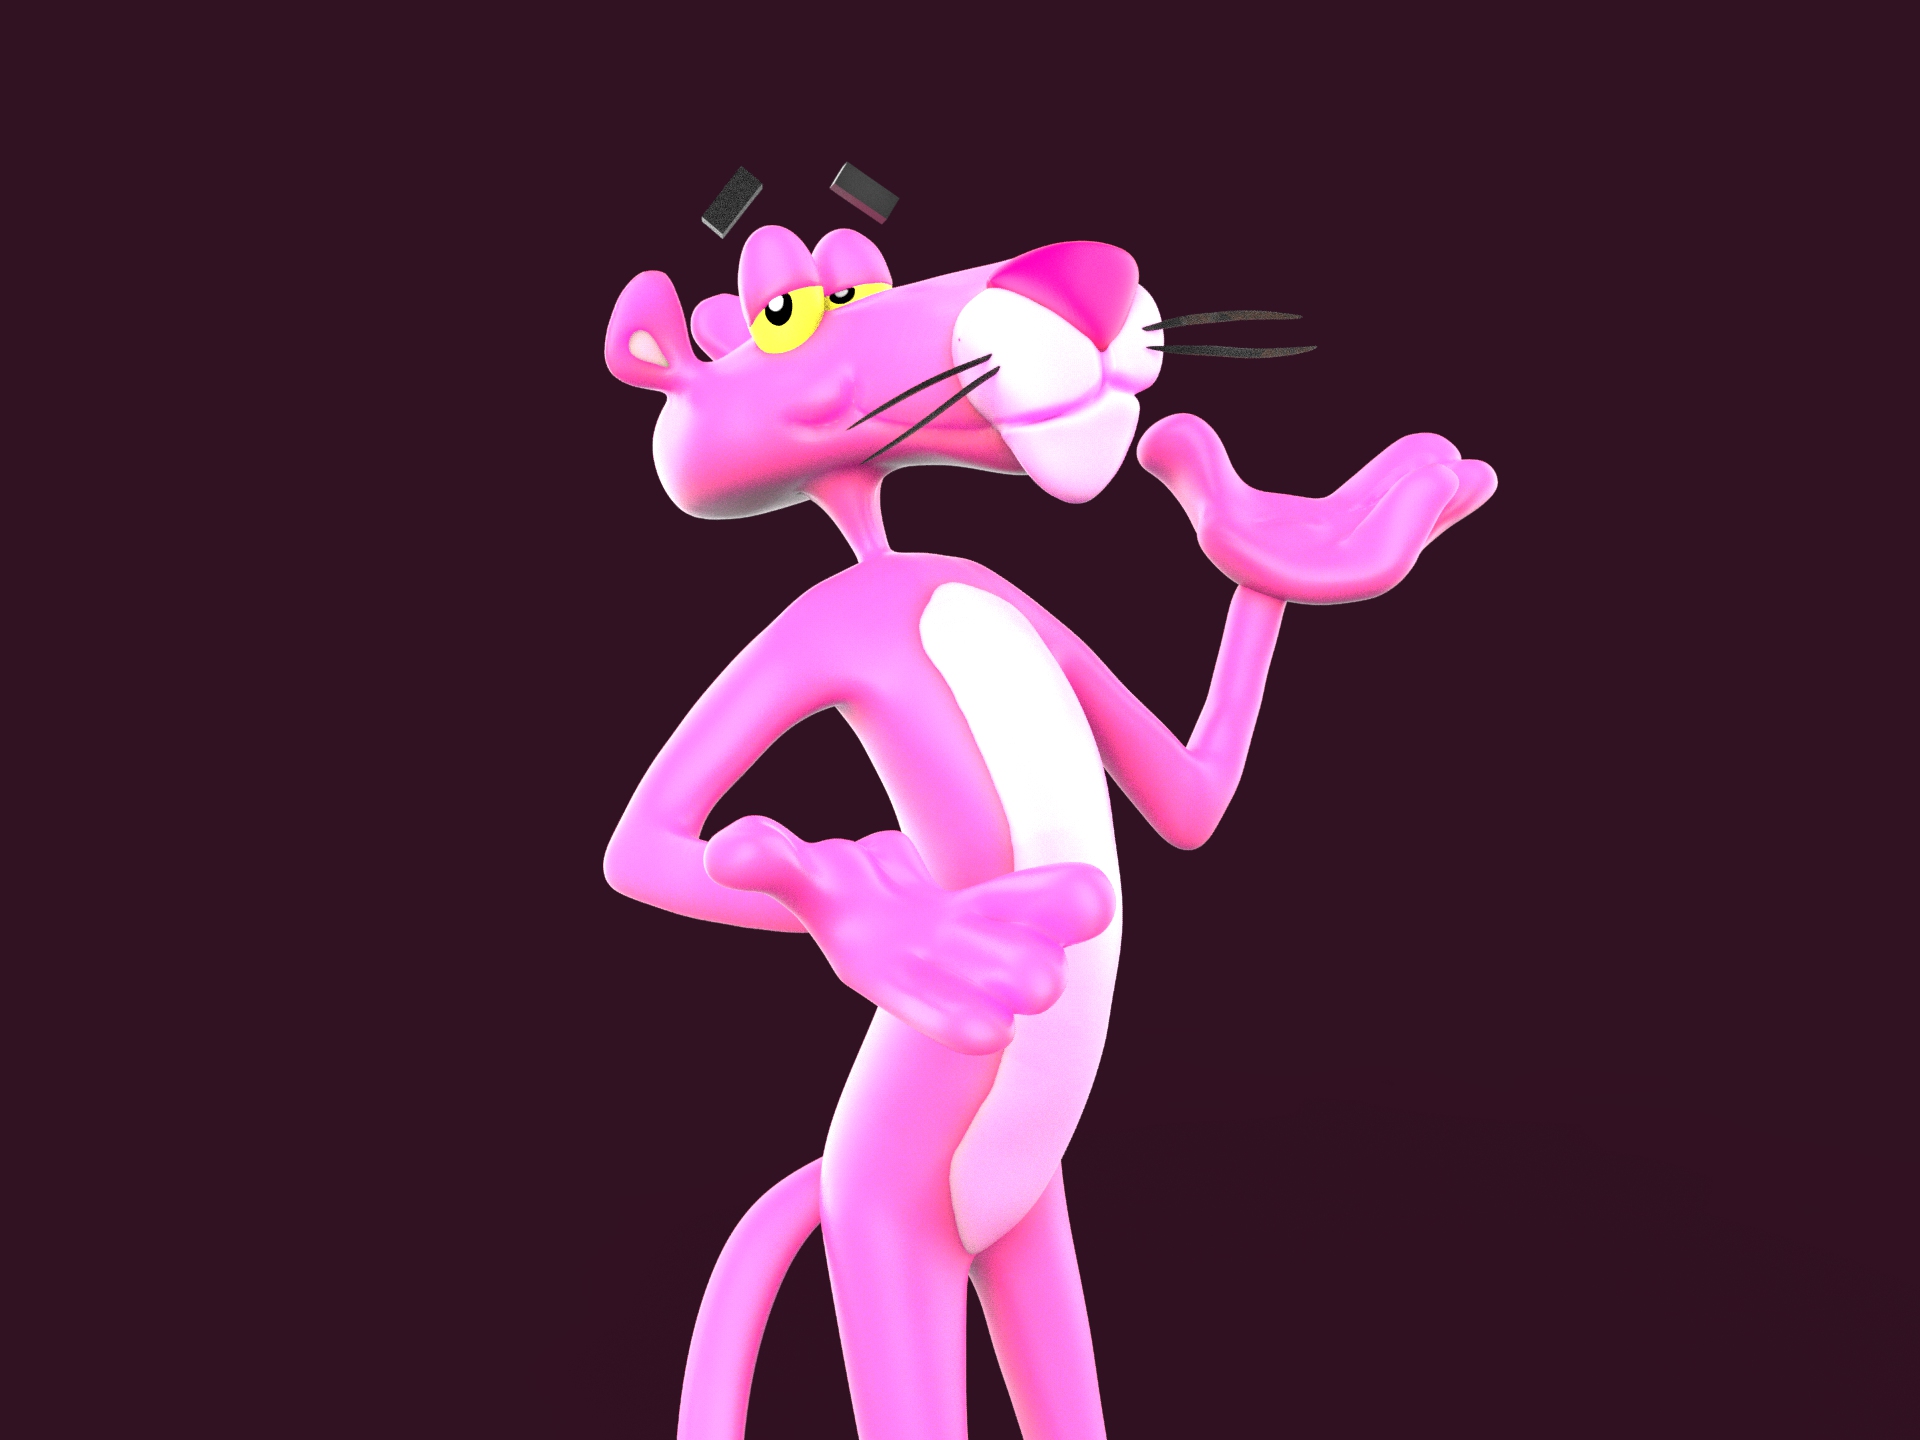 The-Pink-Panther-Wallpaper-HQ.jpg